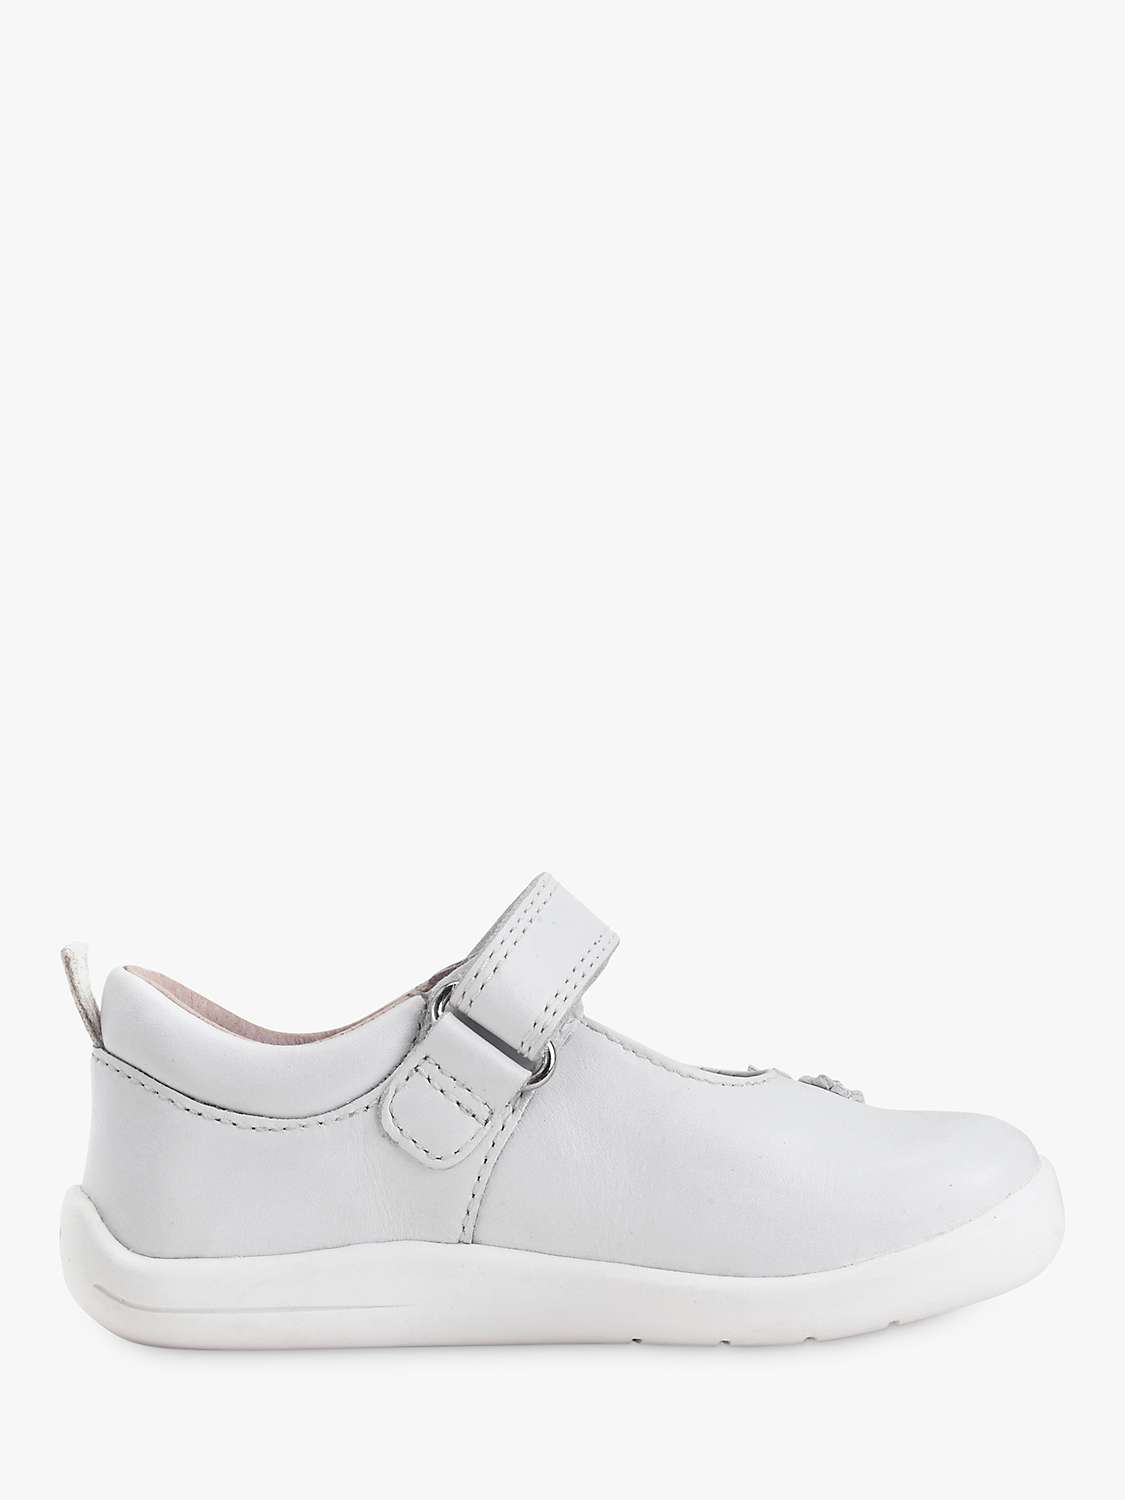 Buy Start-Rite Kids' Leather Fairy Tale First Steps Shoes, White Online at johnlewis.com